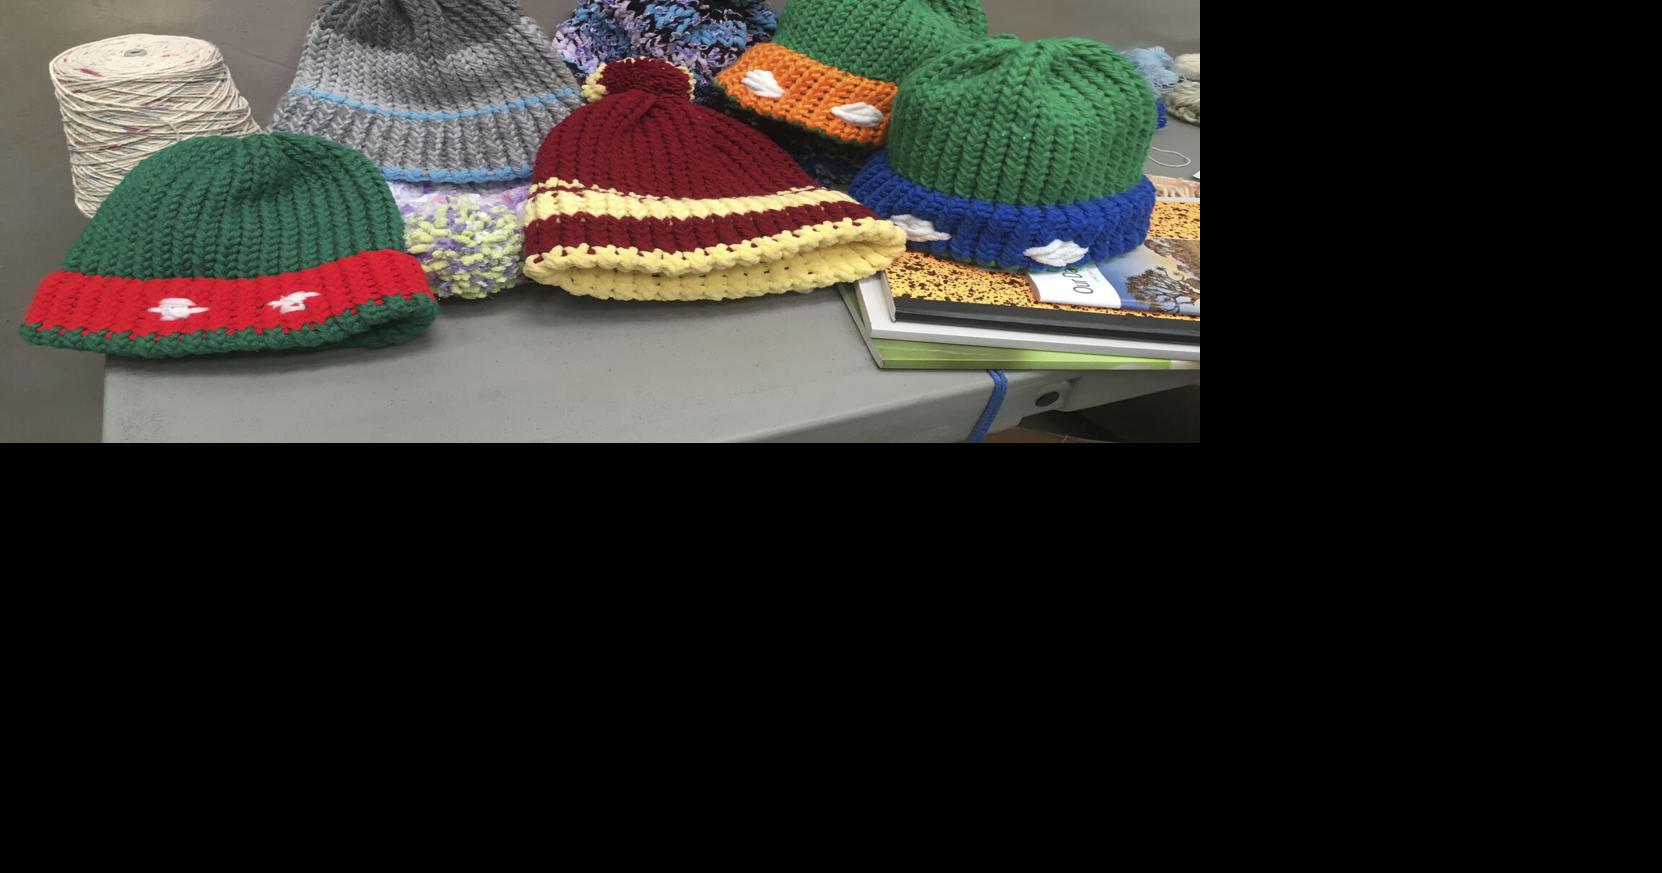 Love making premie hats. What a beautiful way to give back to the comm, Knitted Hat